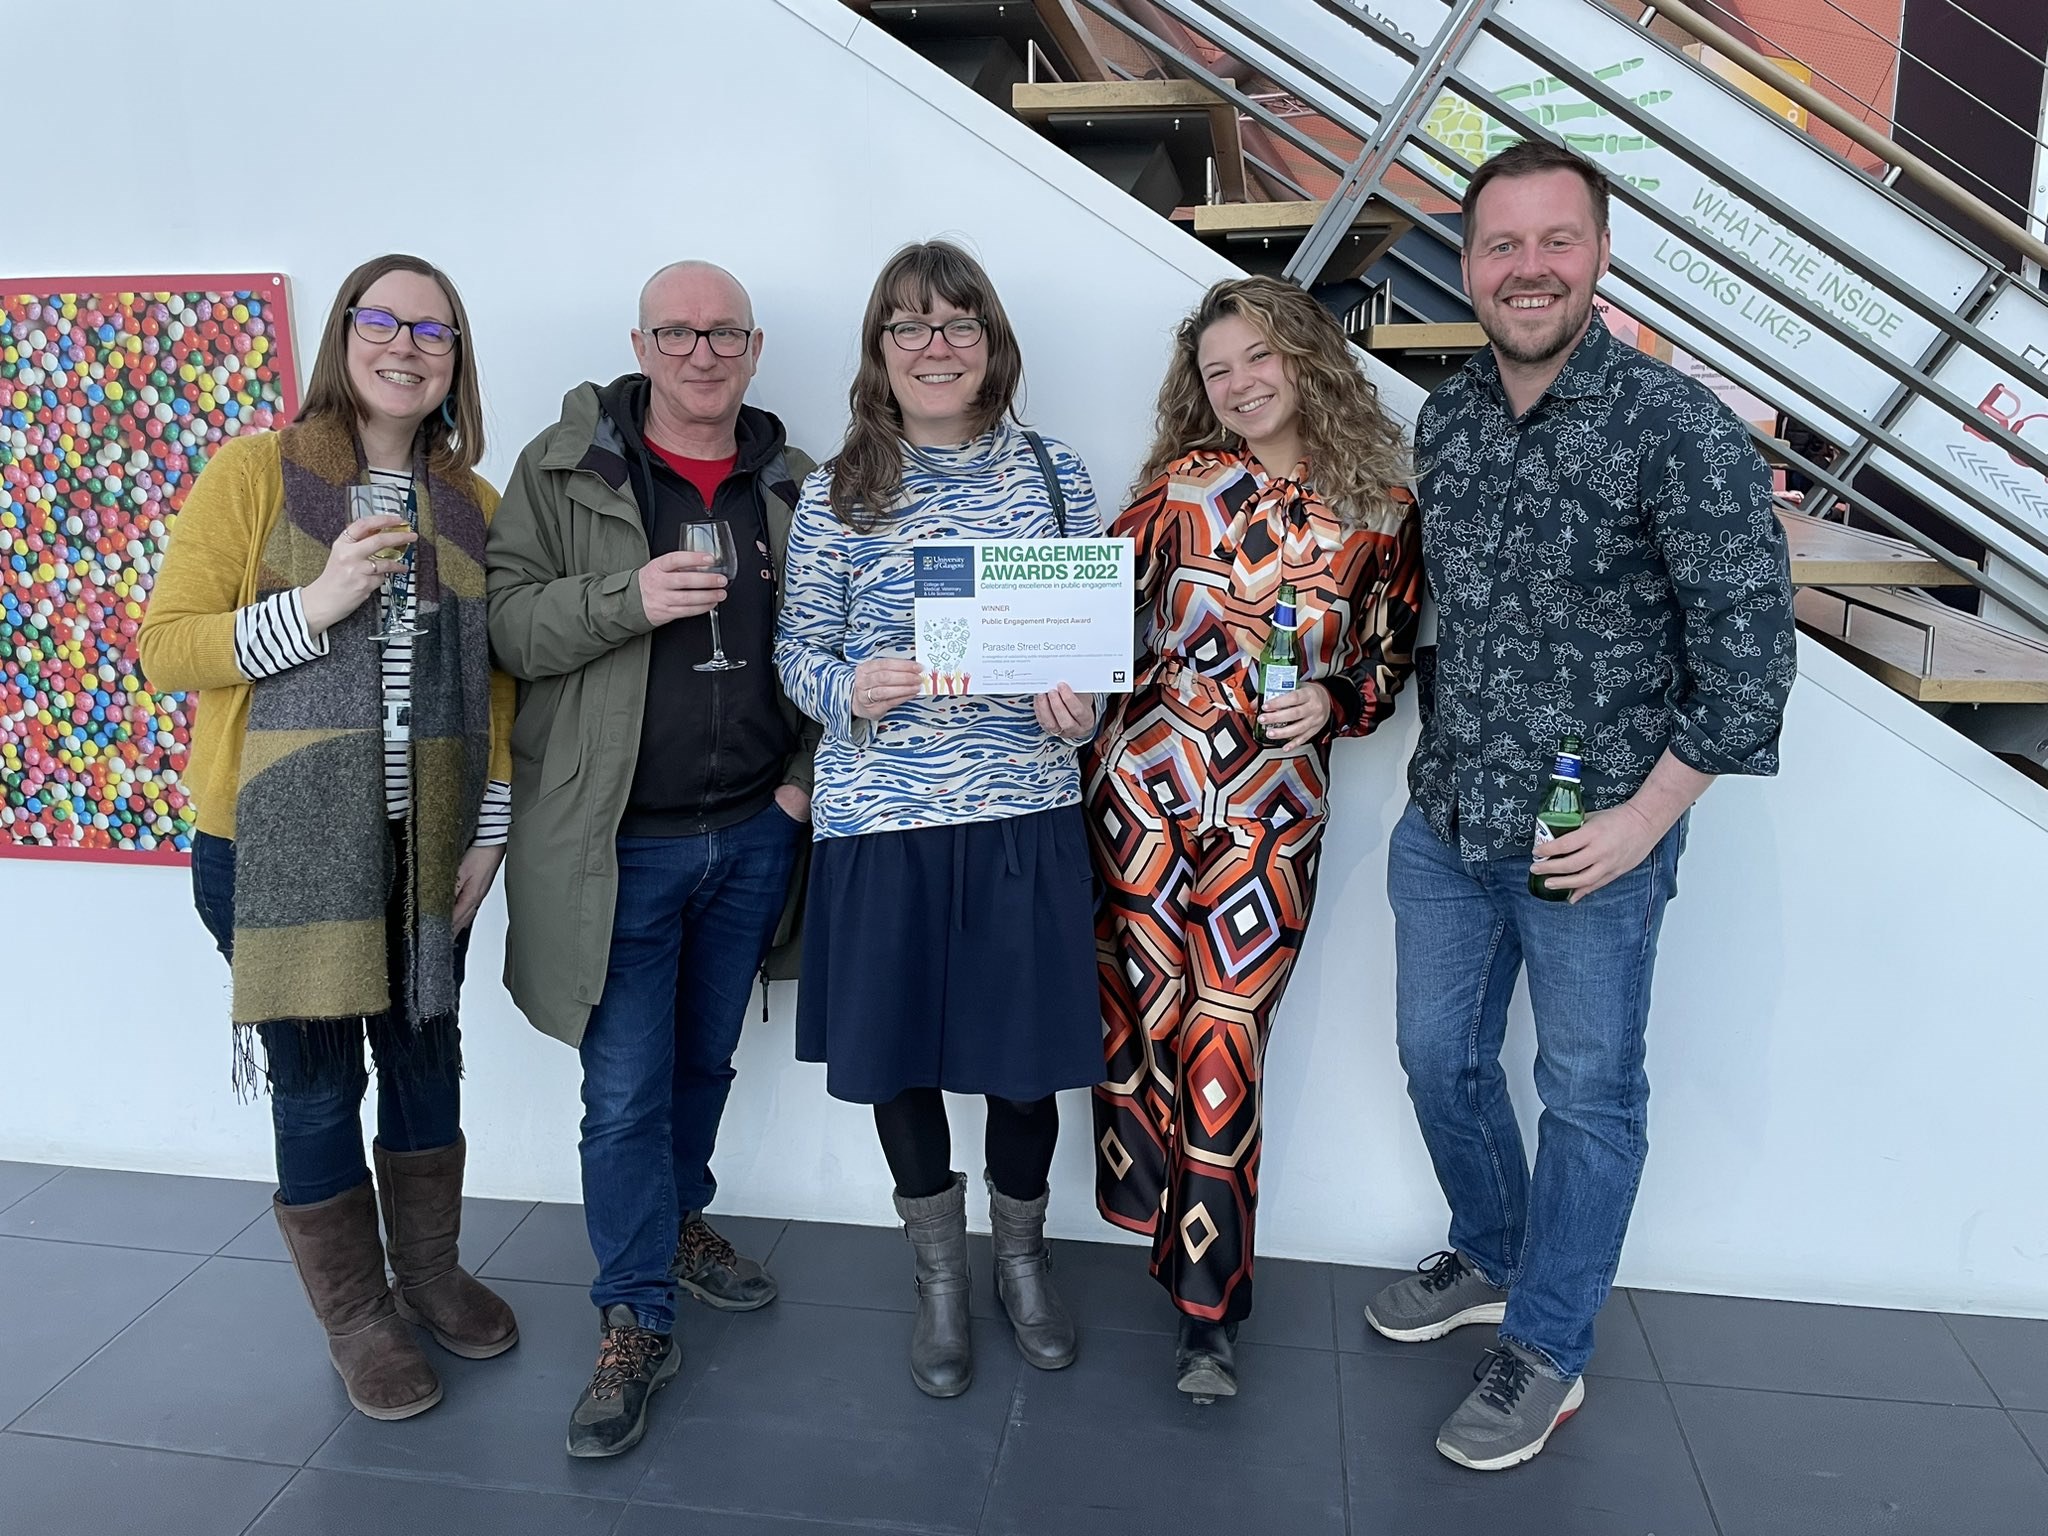 The Parasite Street Science team receive their 2022 MVLS engagement award